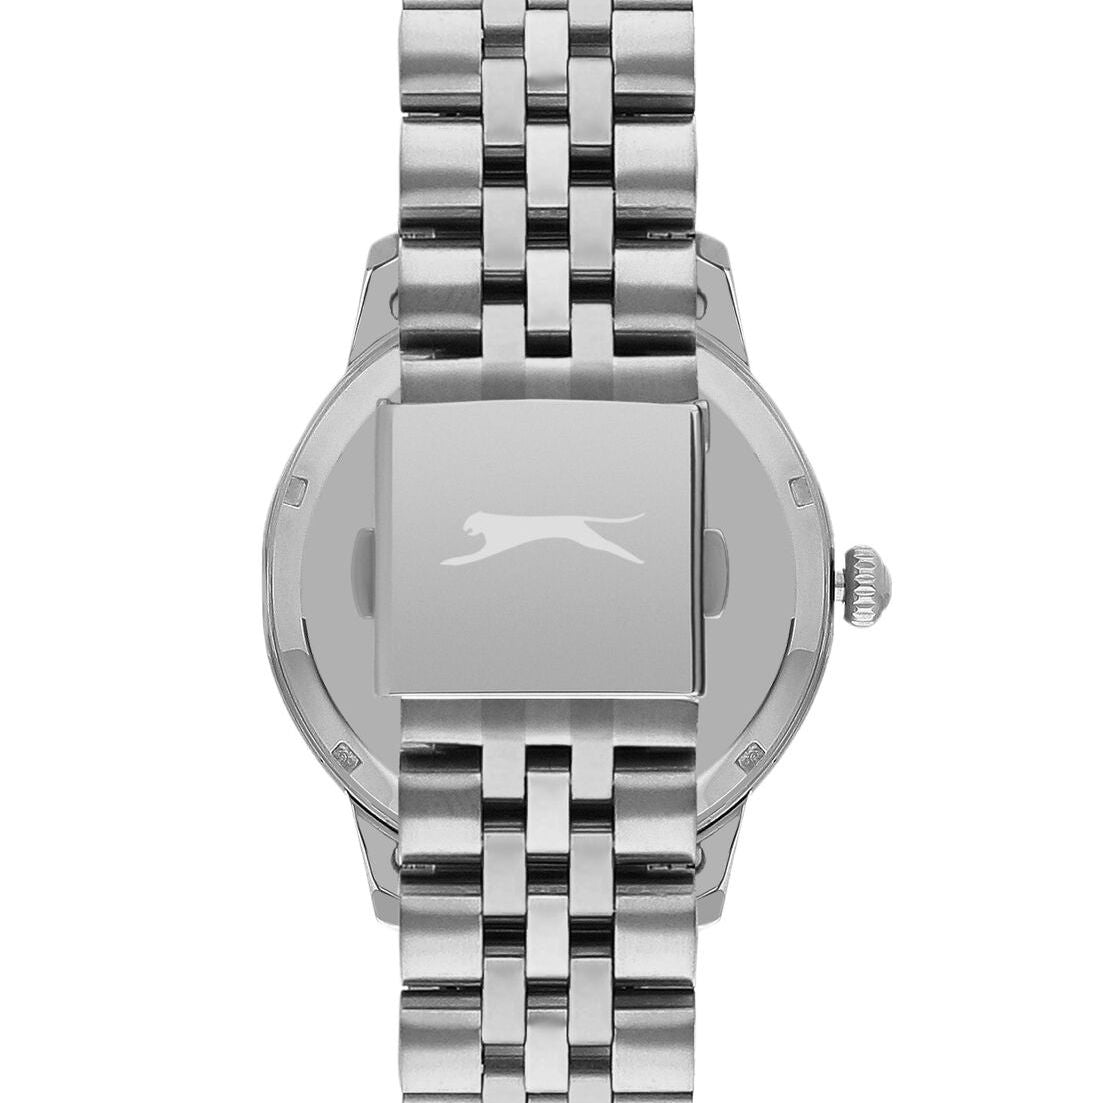 Slazenger Automatic See Through Movement Solid Stainless Steel Gents Watch - SL.9.2269.1.02 Luxury